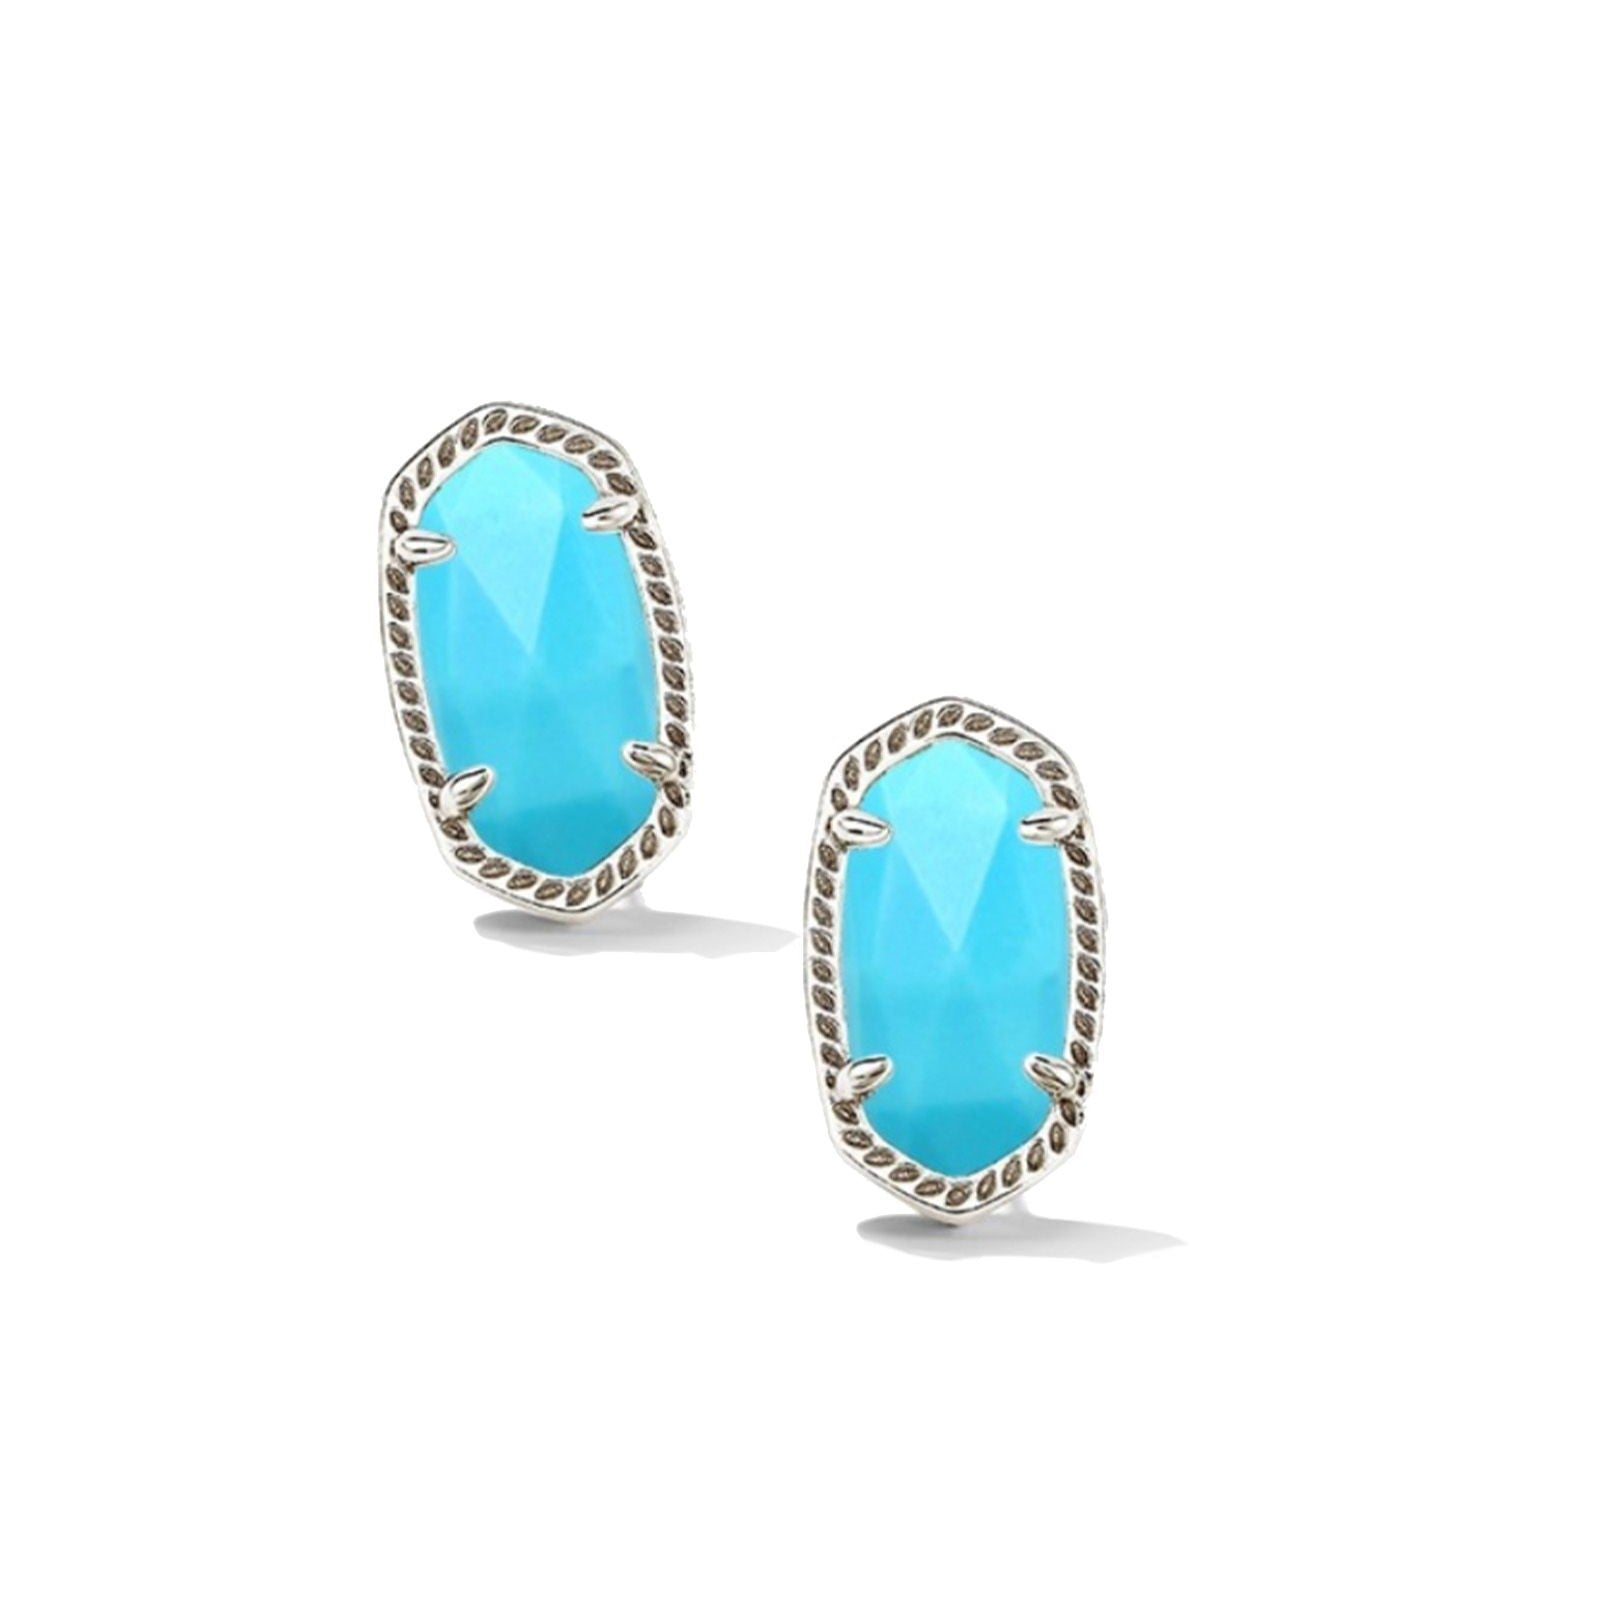 Kendra Scott | Ellie Silver Stud Earrings in Variegated Turquoise Magnesite - Giddy Up Glamour Boutique